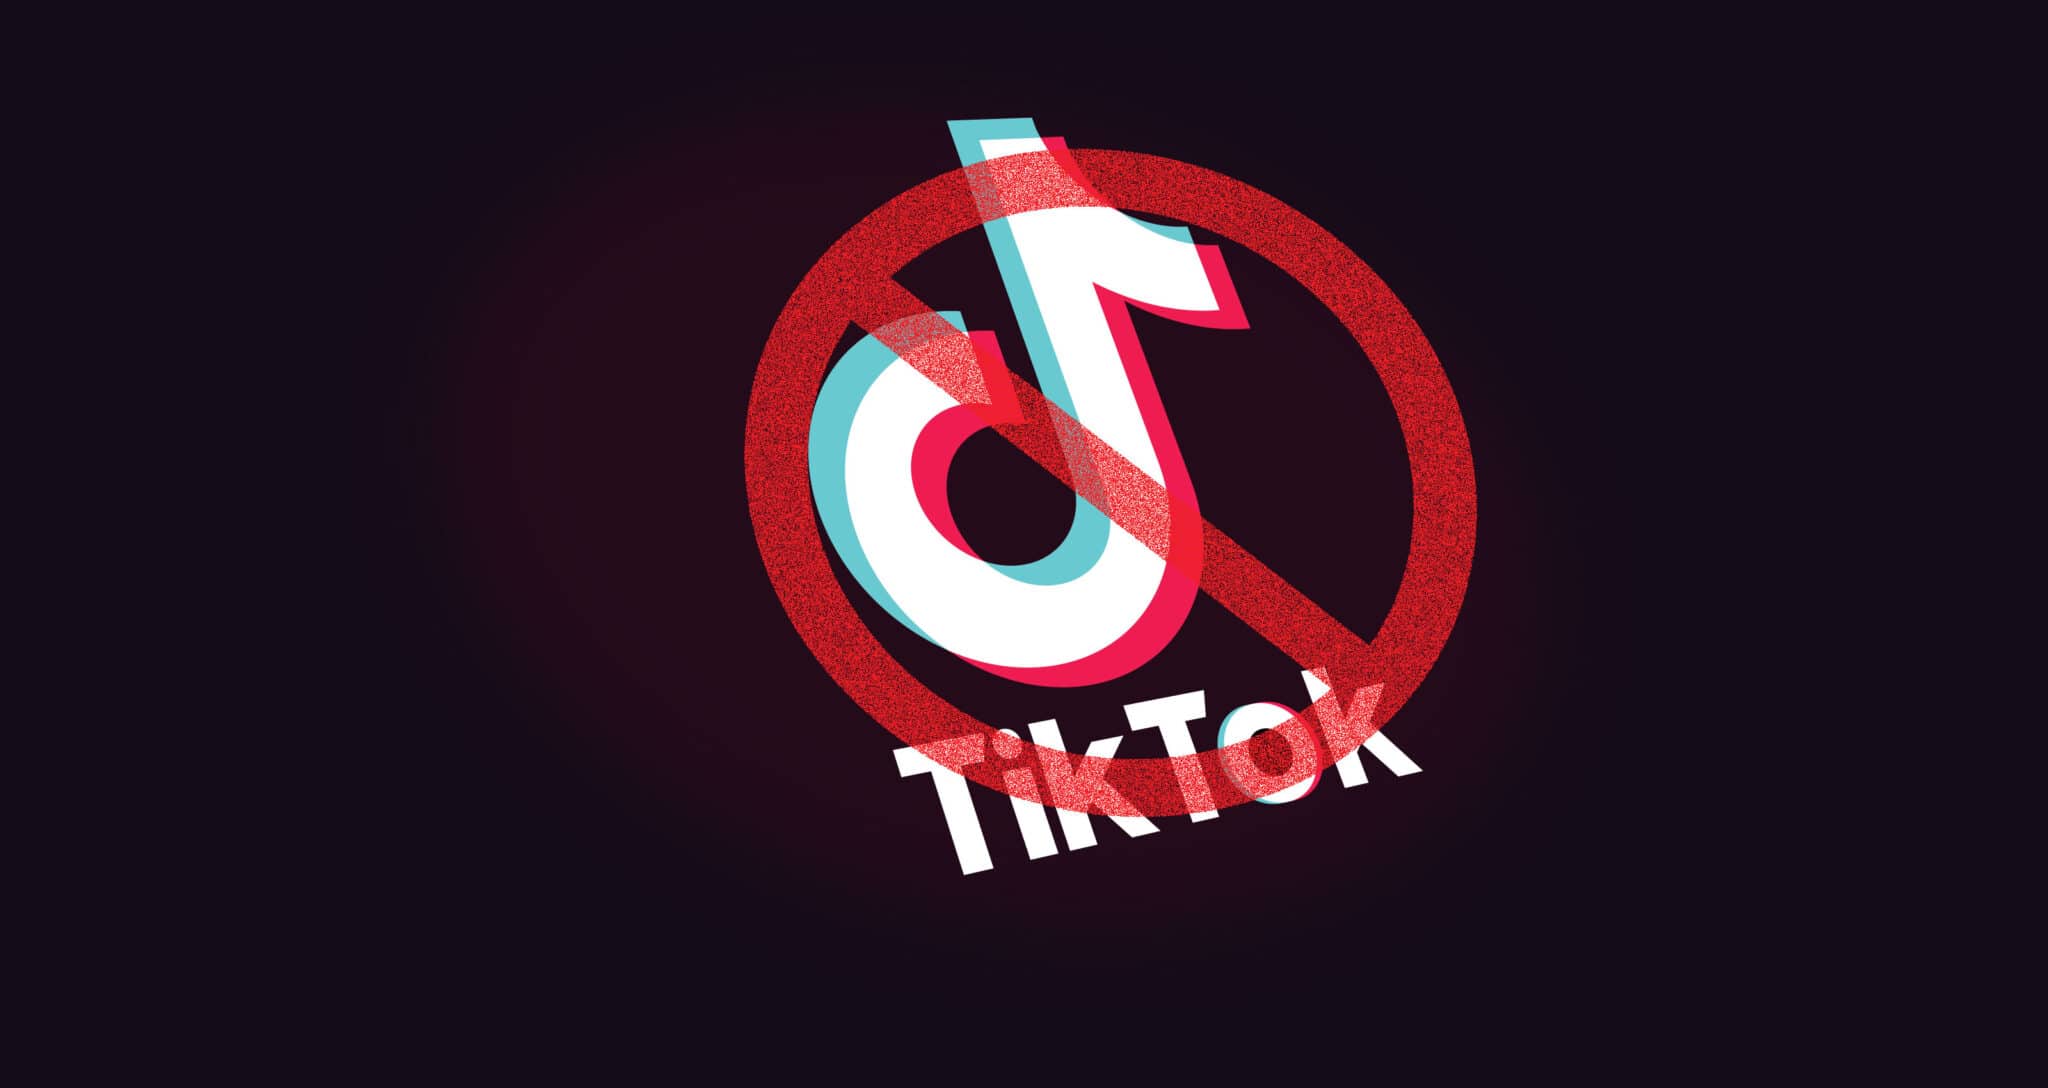 tiktok-to-remain-blocked-until-removal-of-immoral-content-says-phc